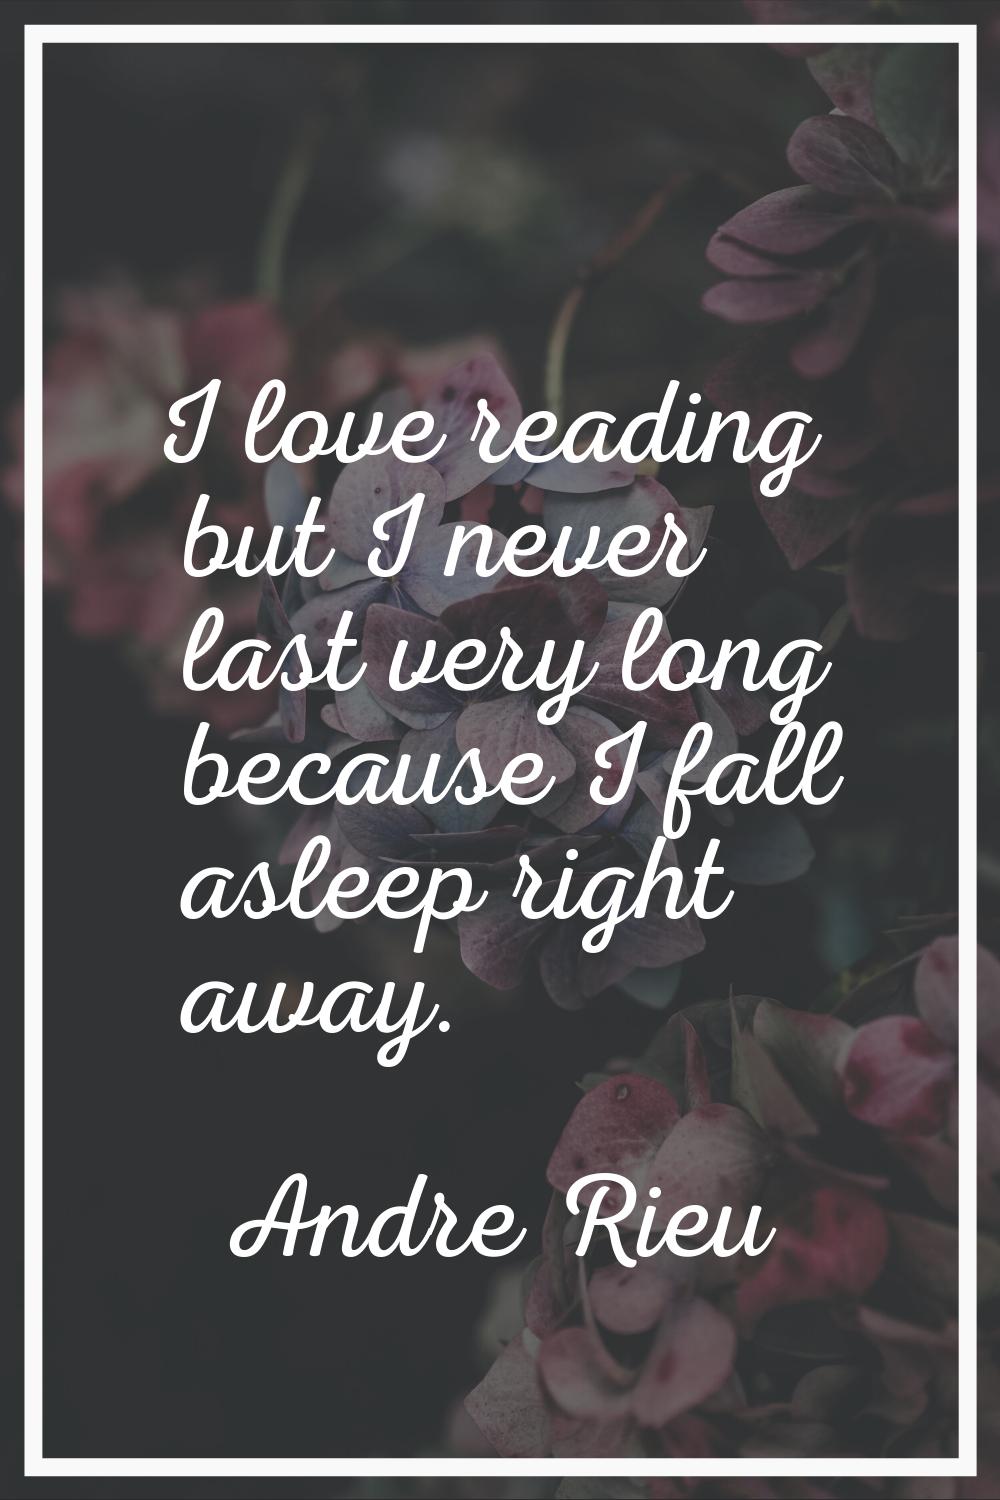 I love reading but I never last very long because I fall asleep right away.